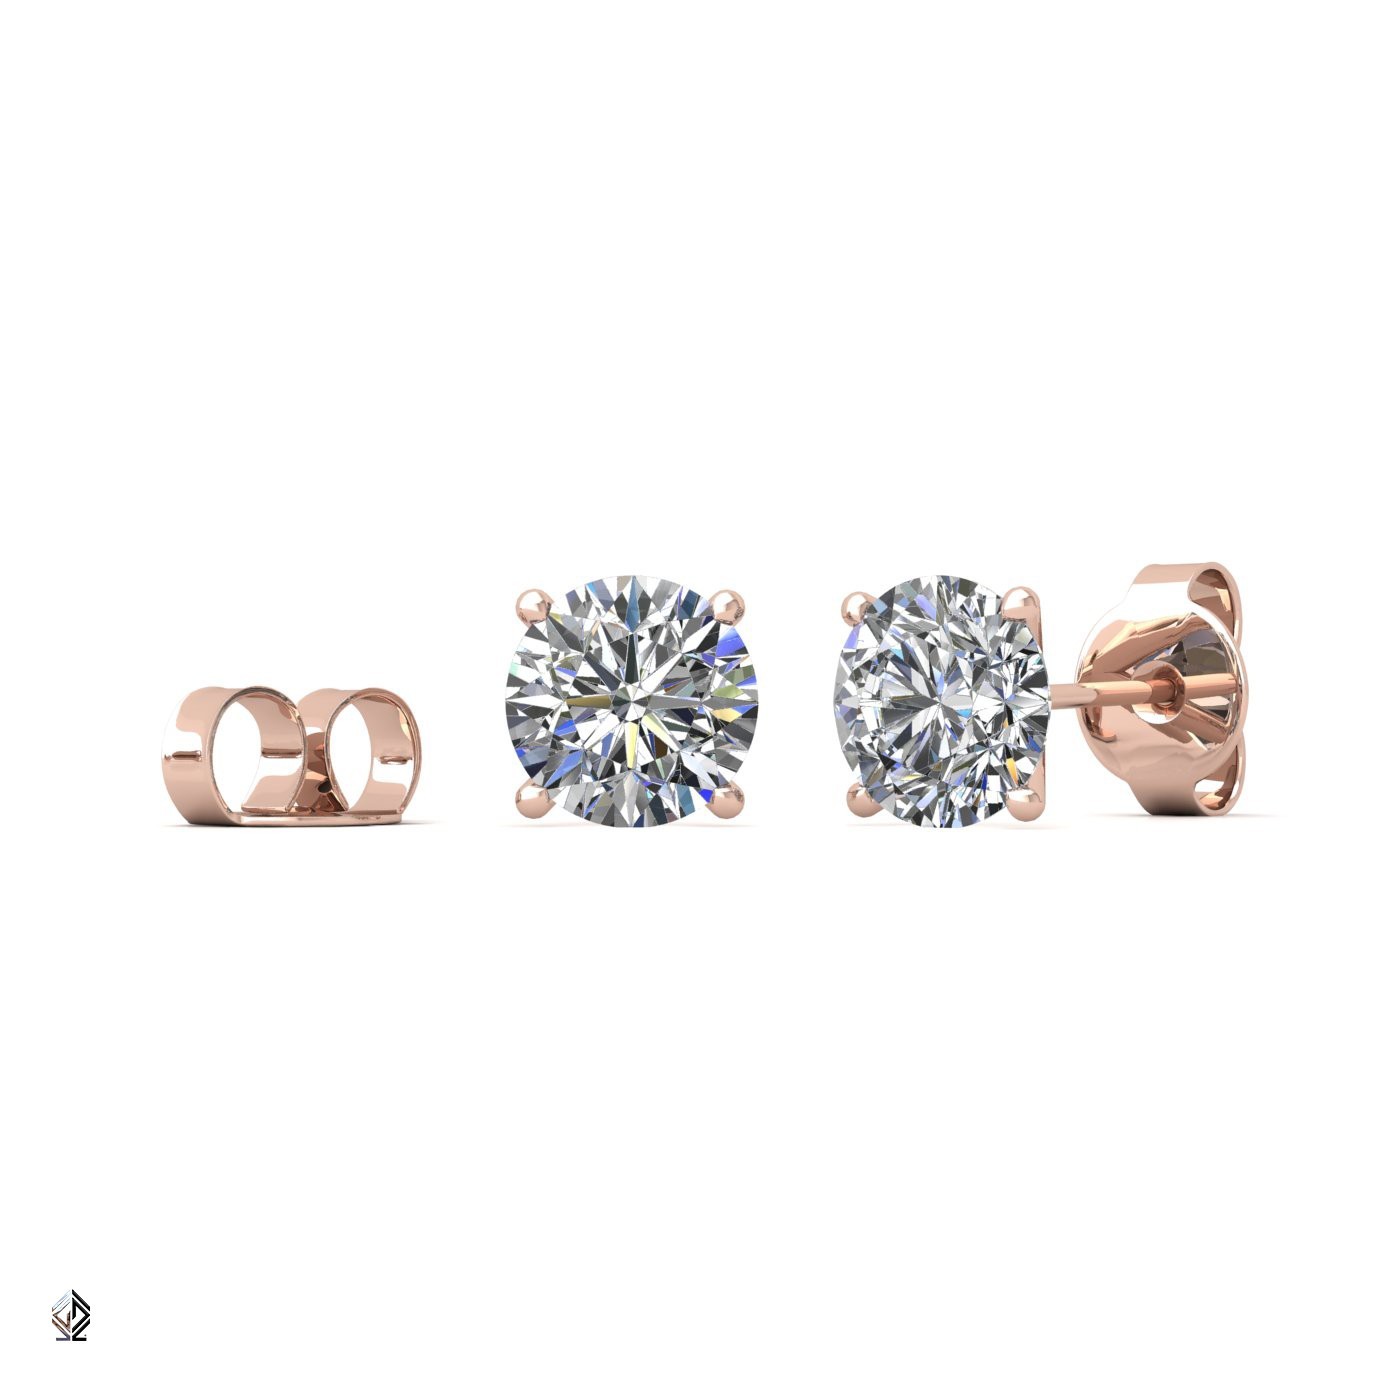 18k rose gold 0,3 ct 4 prongs round cut classic diamond earring studs Photos & images